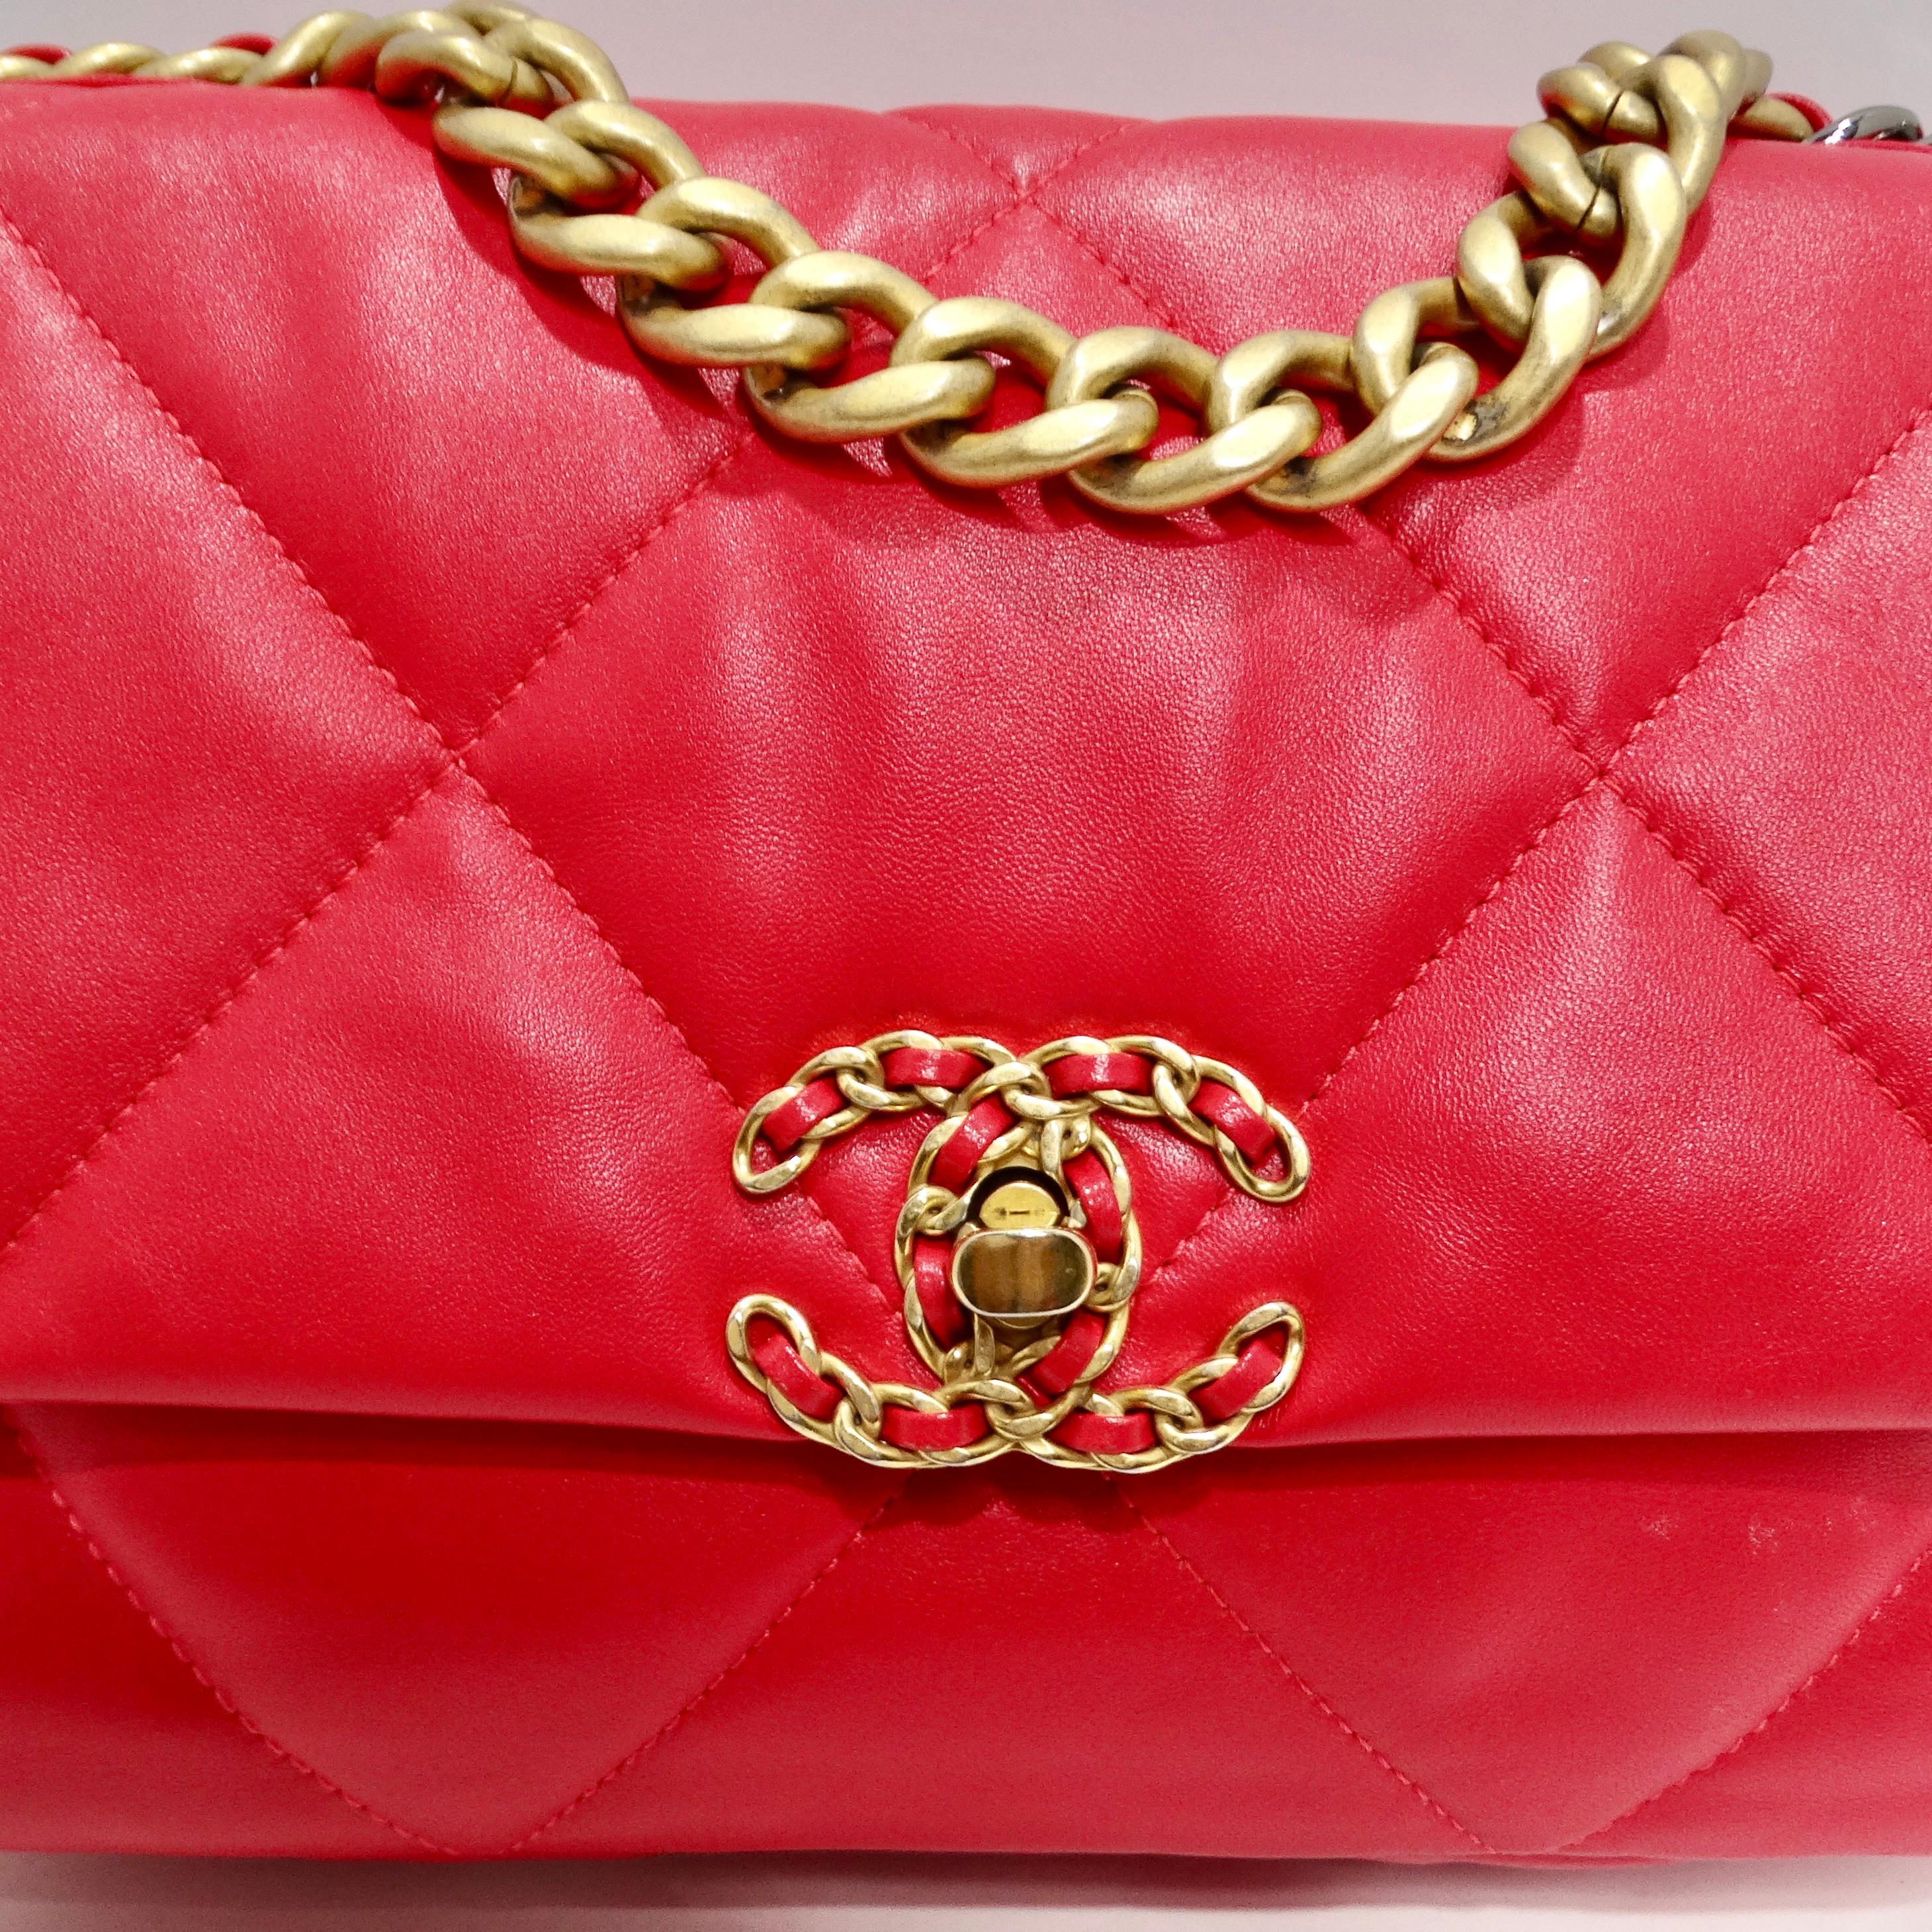 Chanel 2022 Medium 19 Flap Bag Red In Excellent Condition For Sale In Scottsdale, AZ